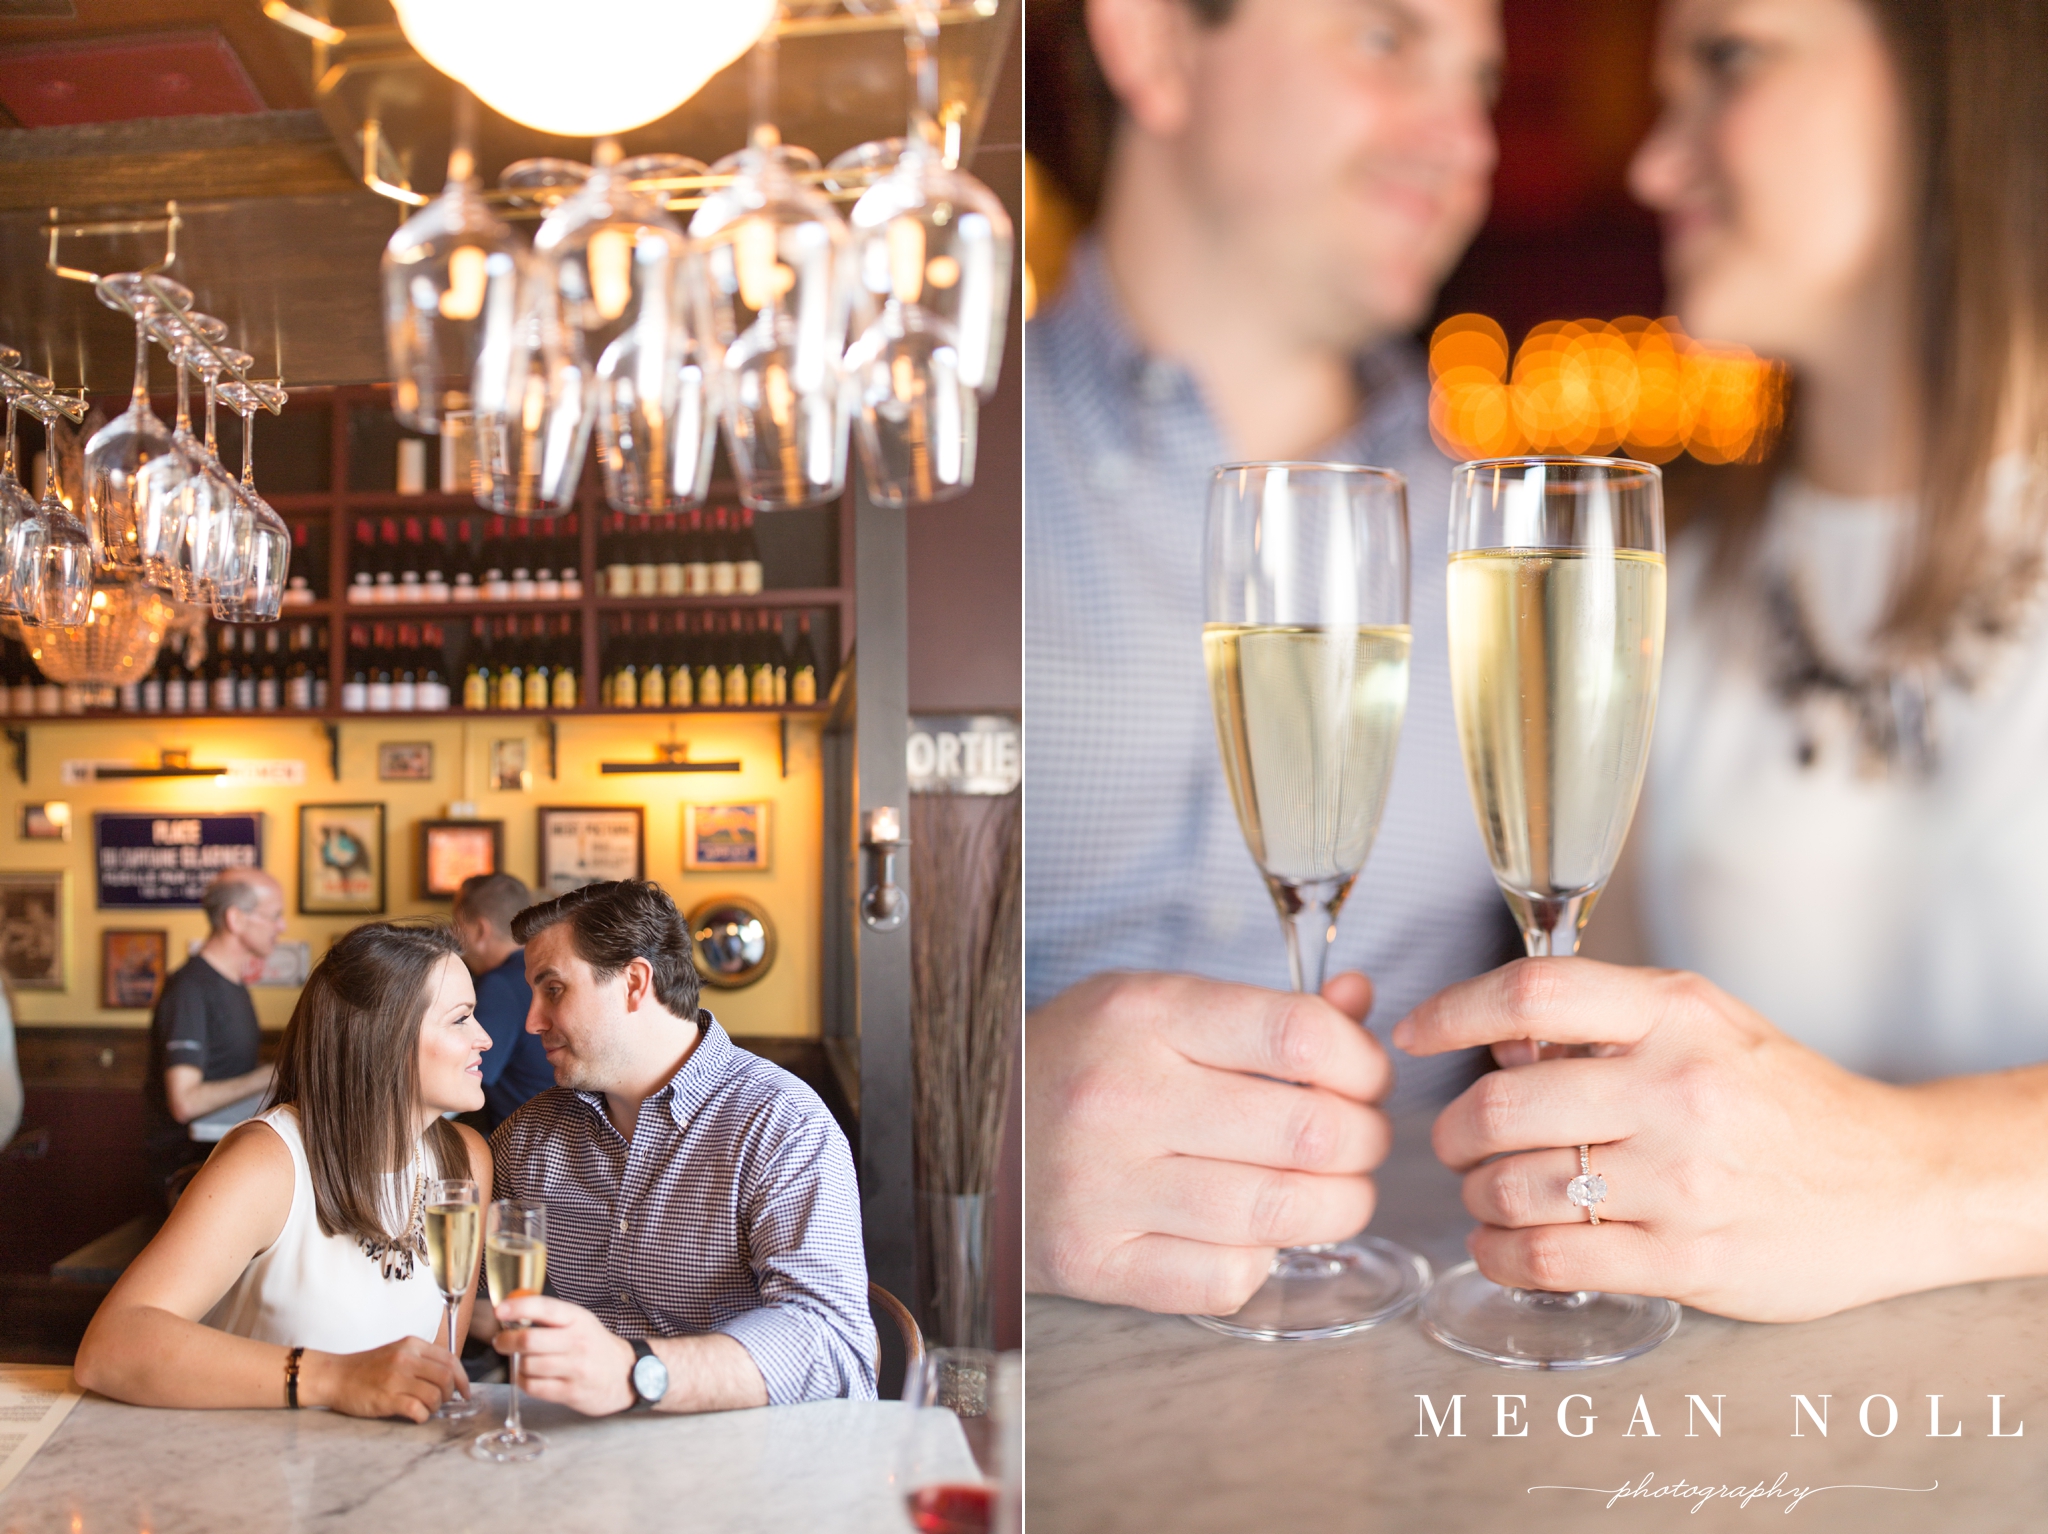 Wine Bar Engagement Pictures, Engagement Pictures with Wine, New York